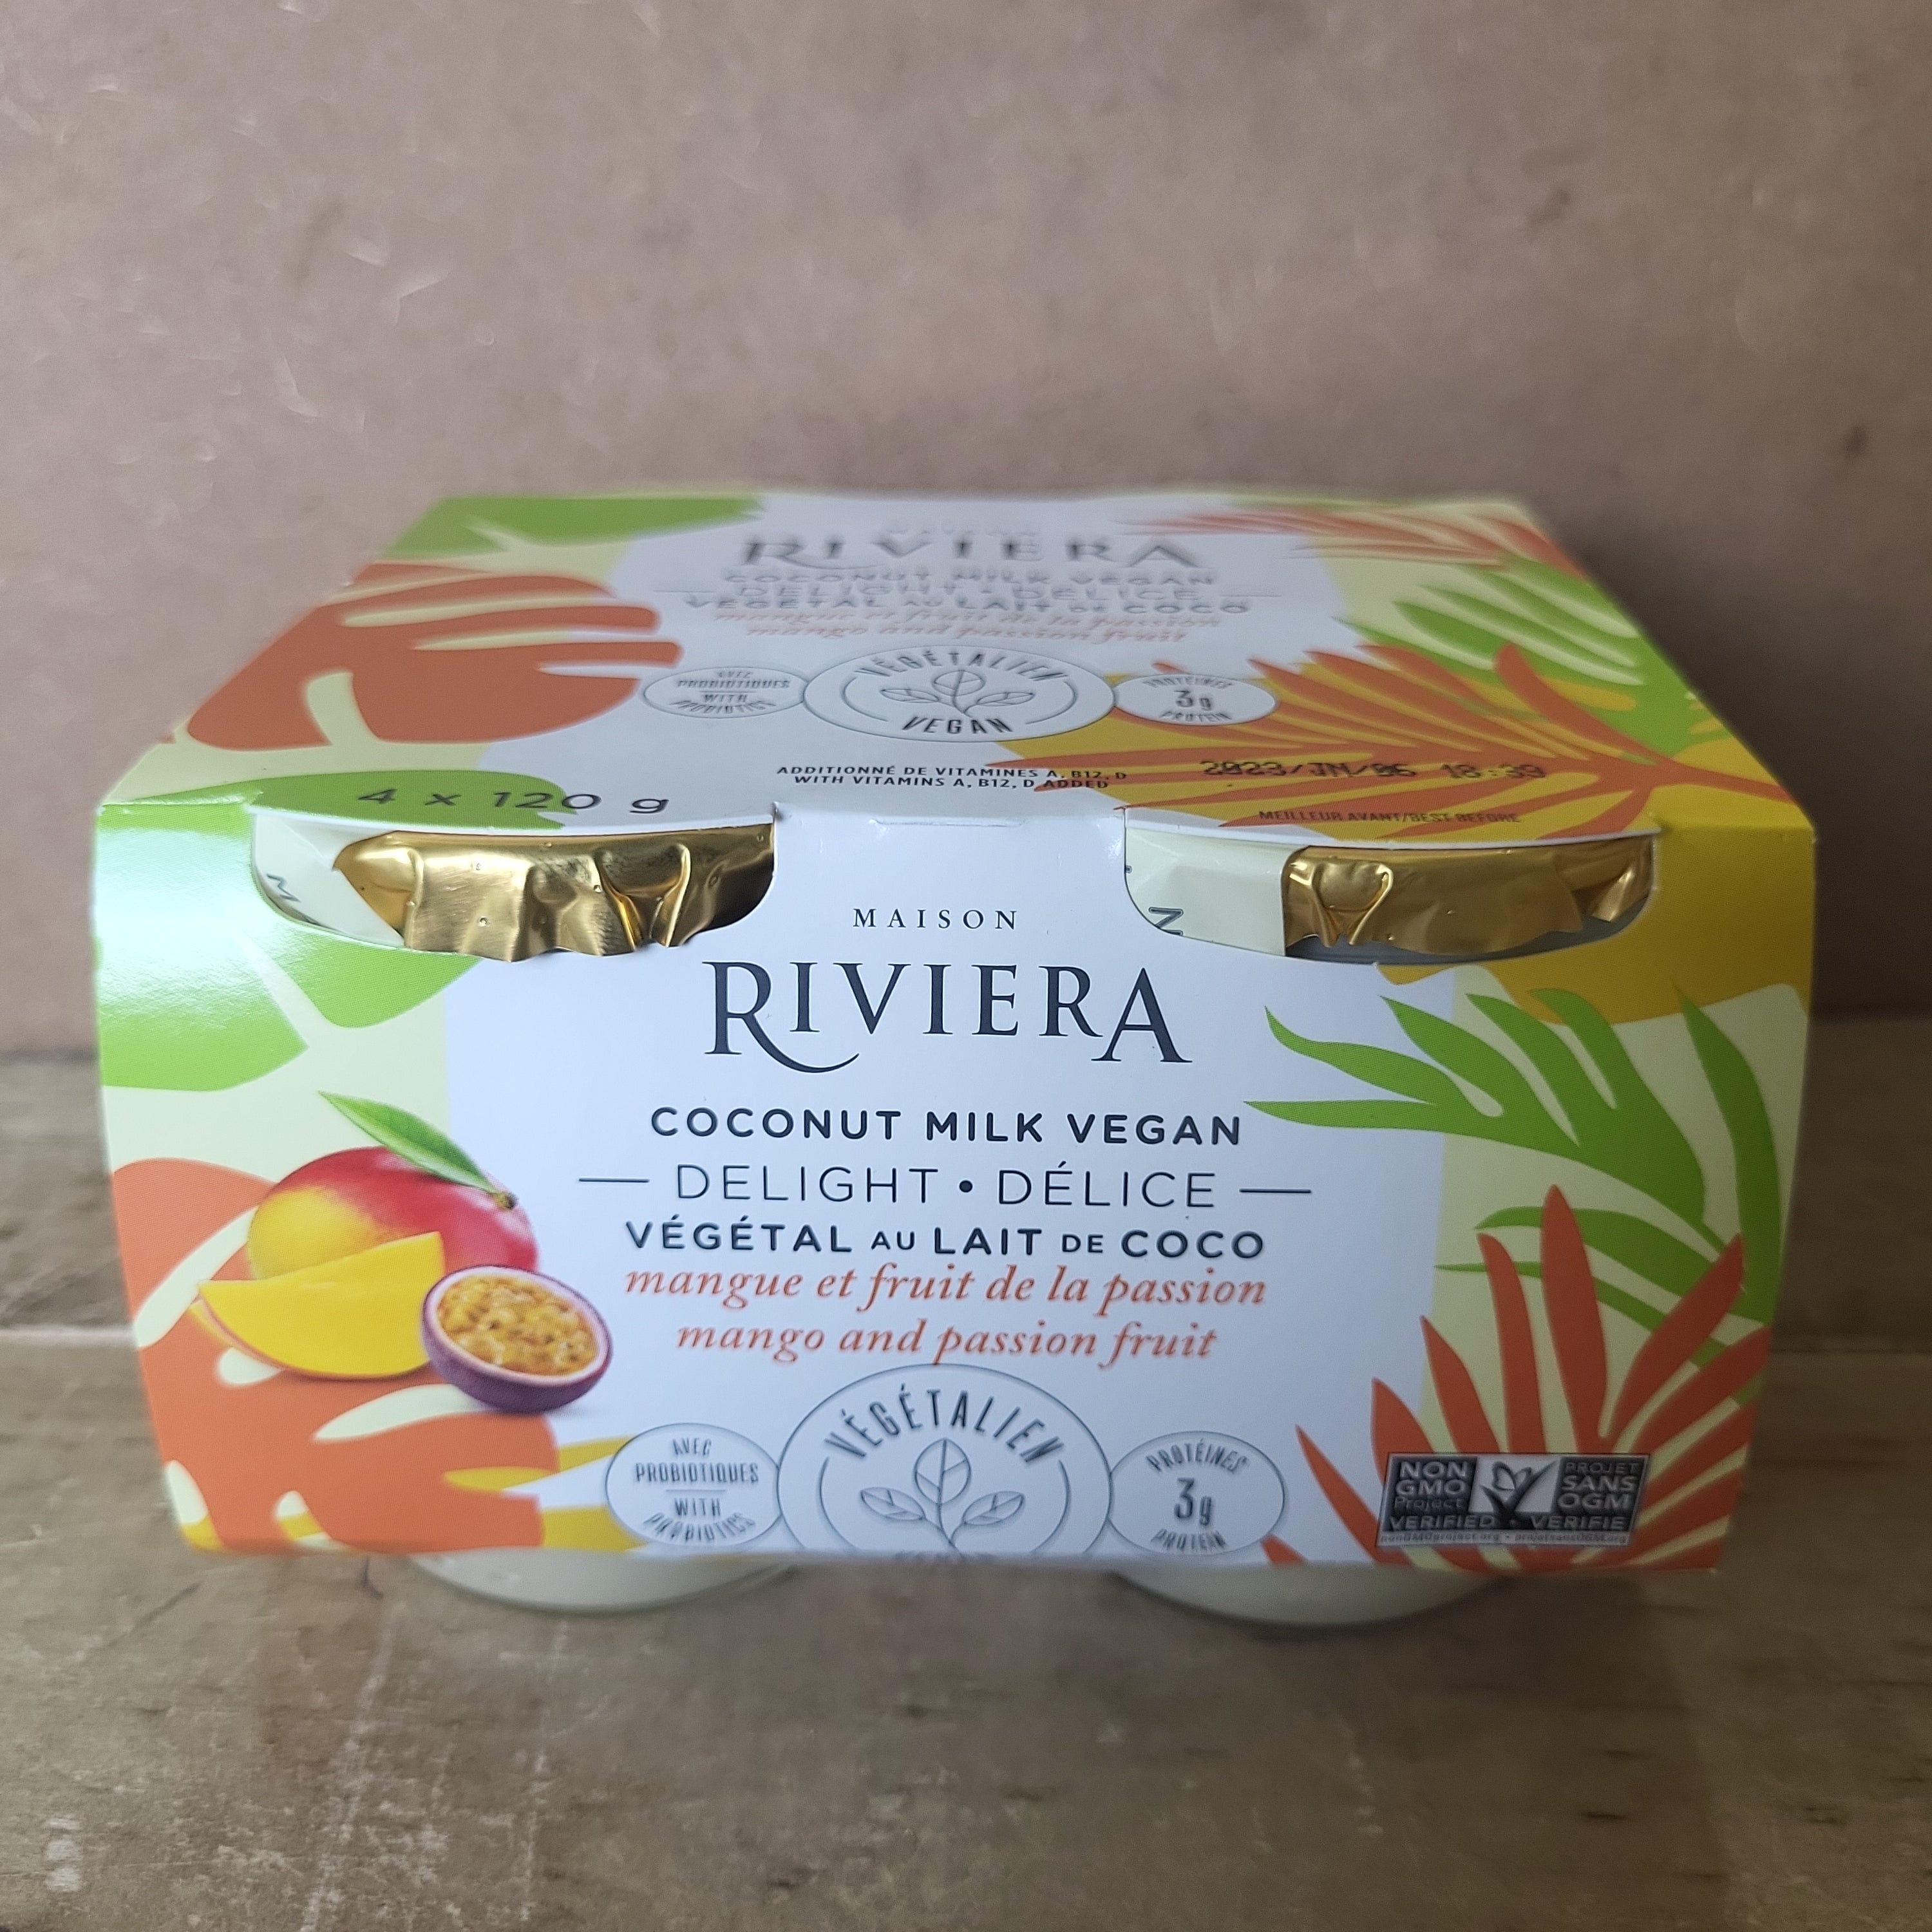 Buy Maison Riviera Parmesan Cheese grated with same day delivery